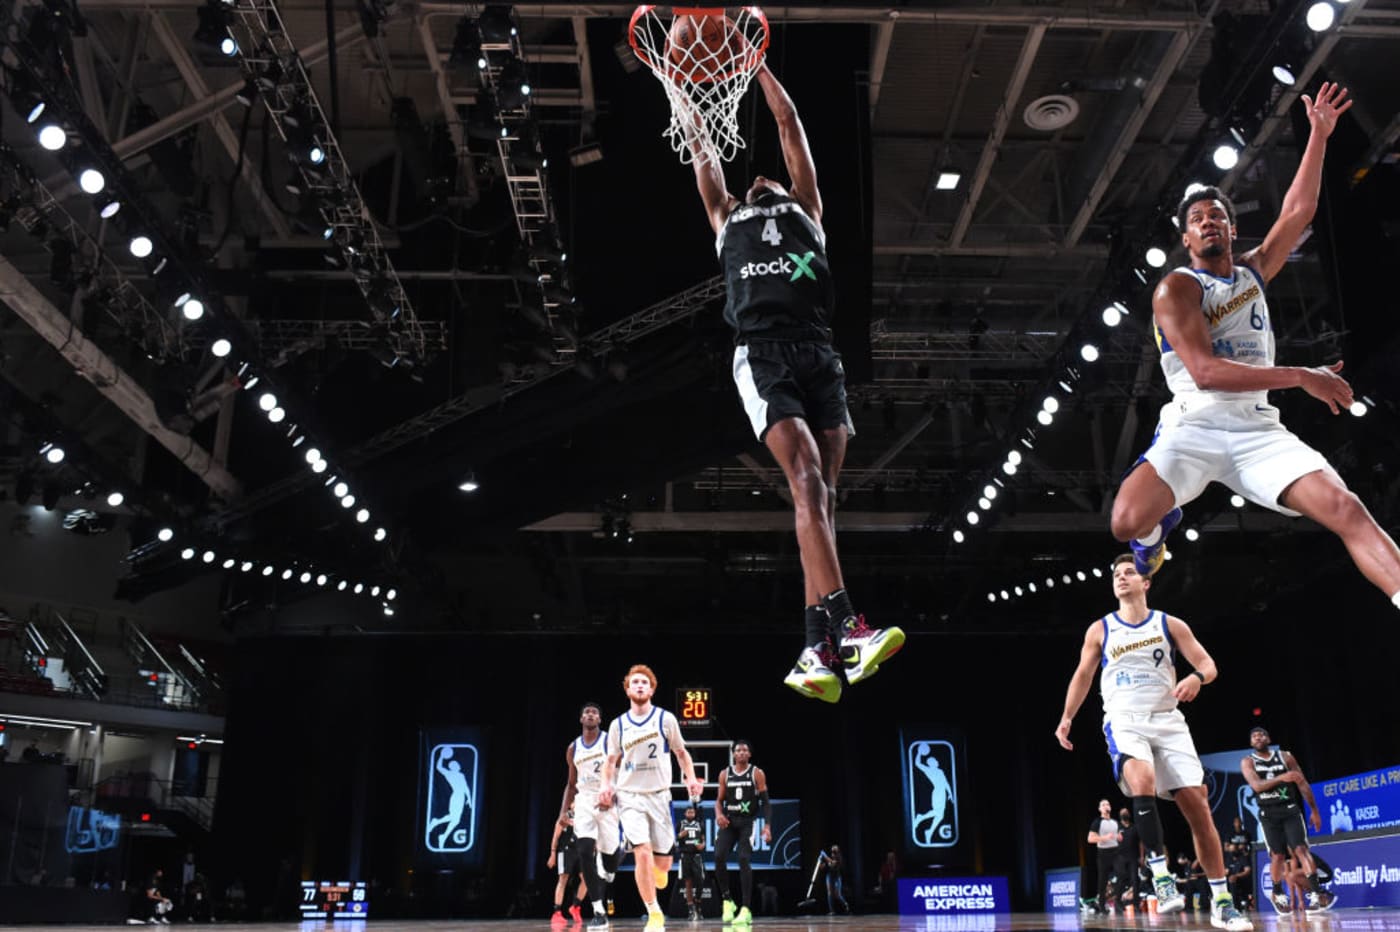 NBA G League Ignite What It Is, Prospects, Bubble Life, and More Complex